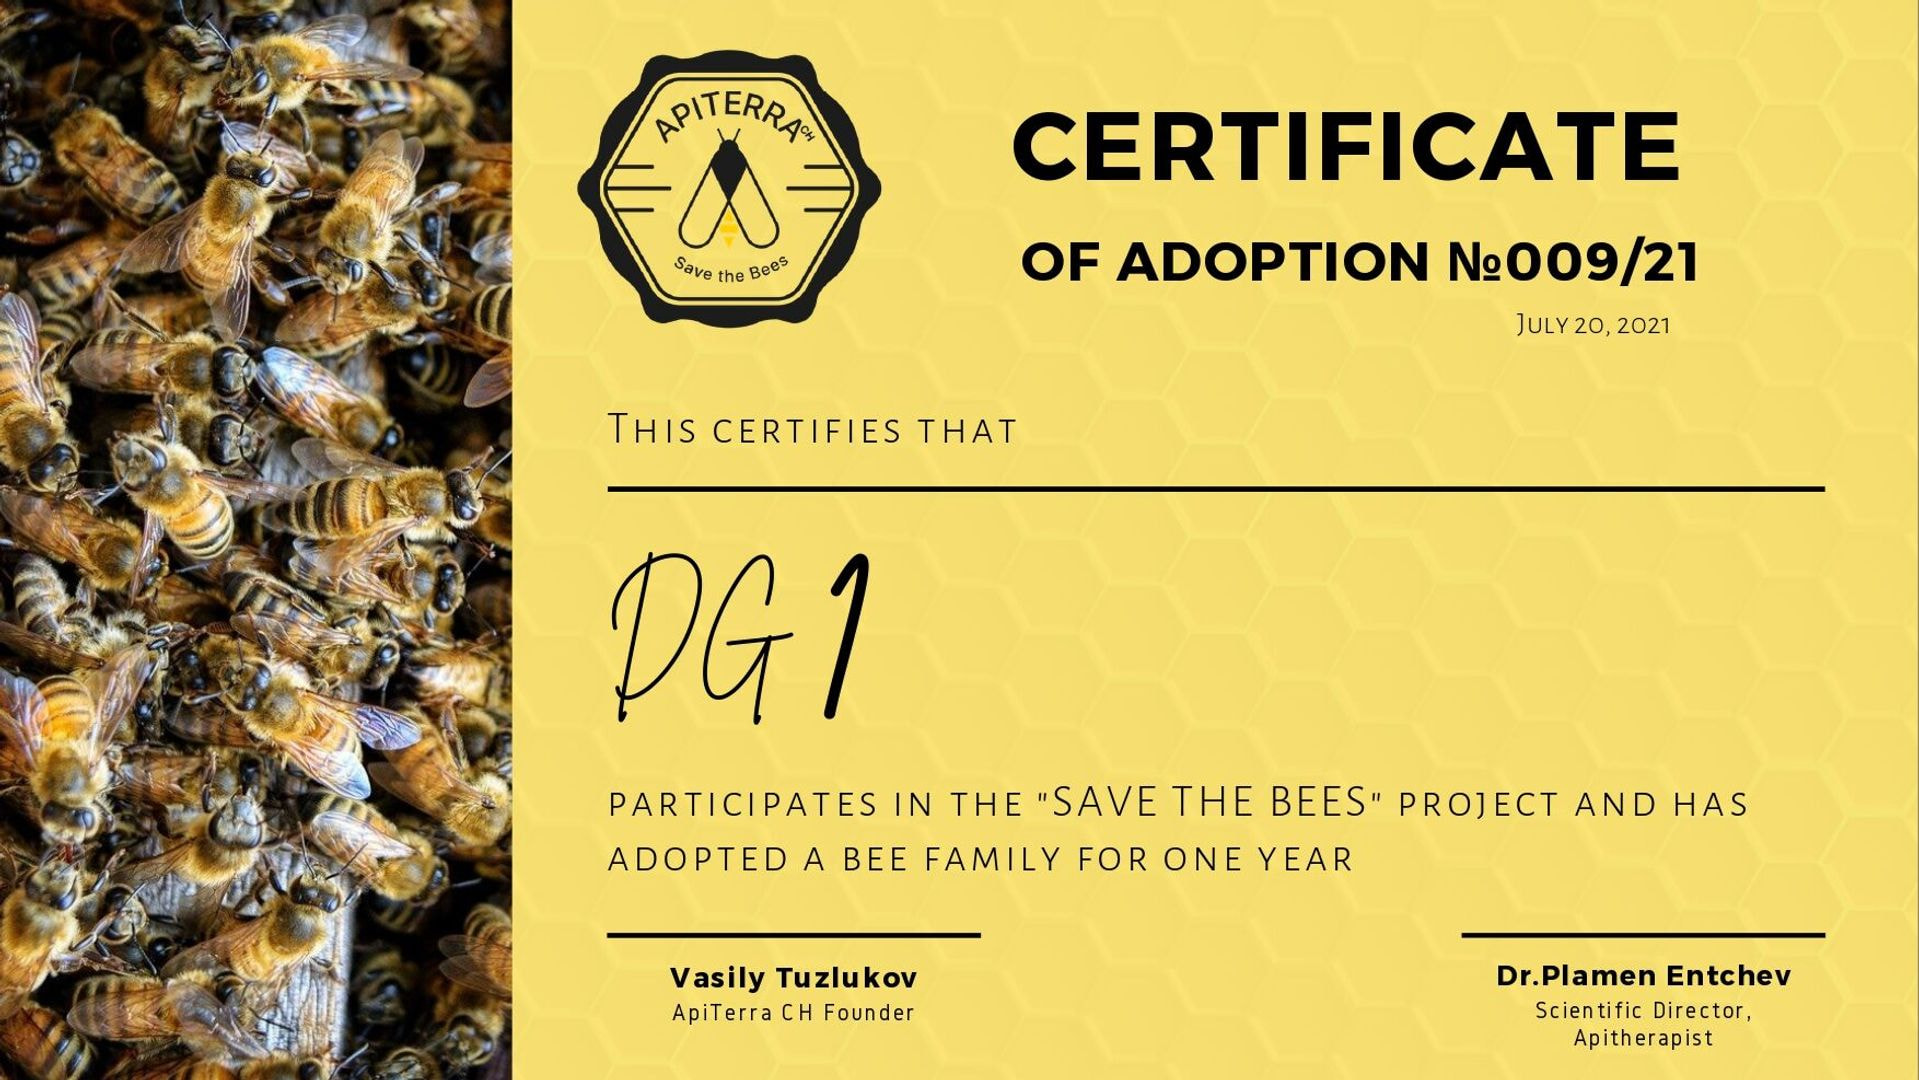 adoption certificate for "Save th Bee" project